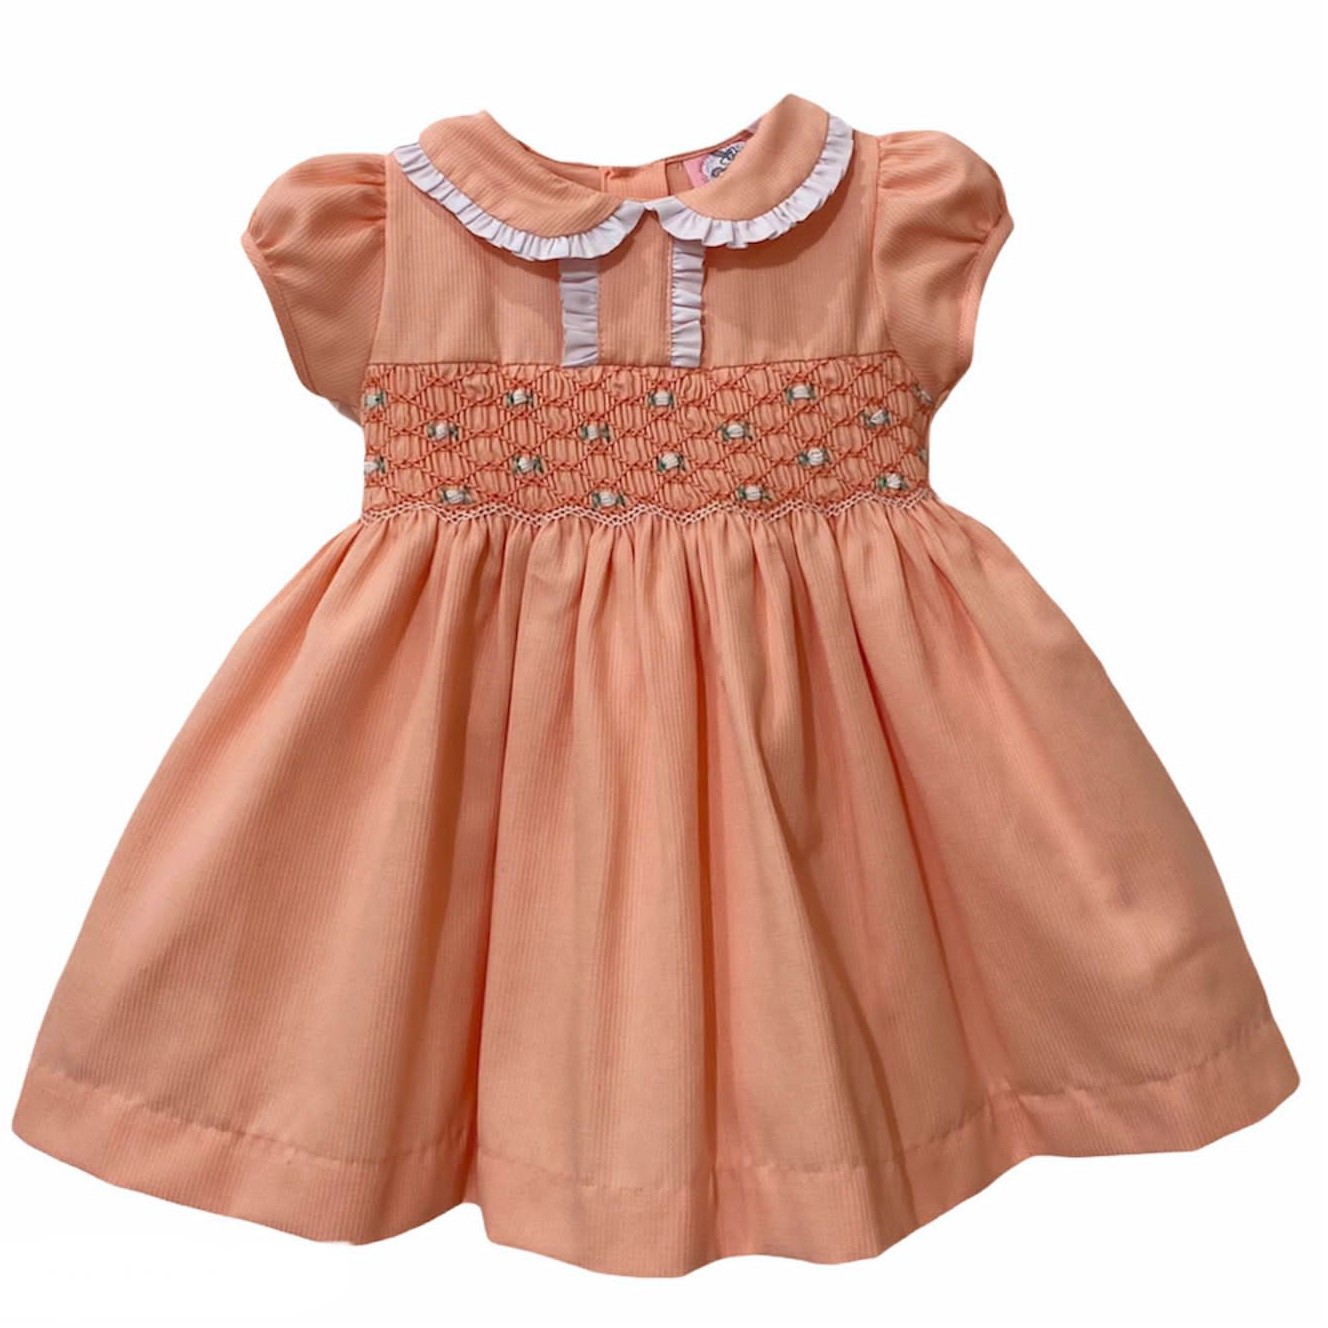 Girl's Dress with Hand Embroidery - Light Orange Color with White Embroidery